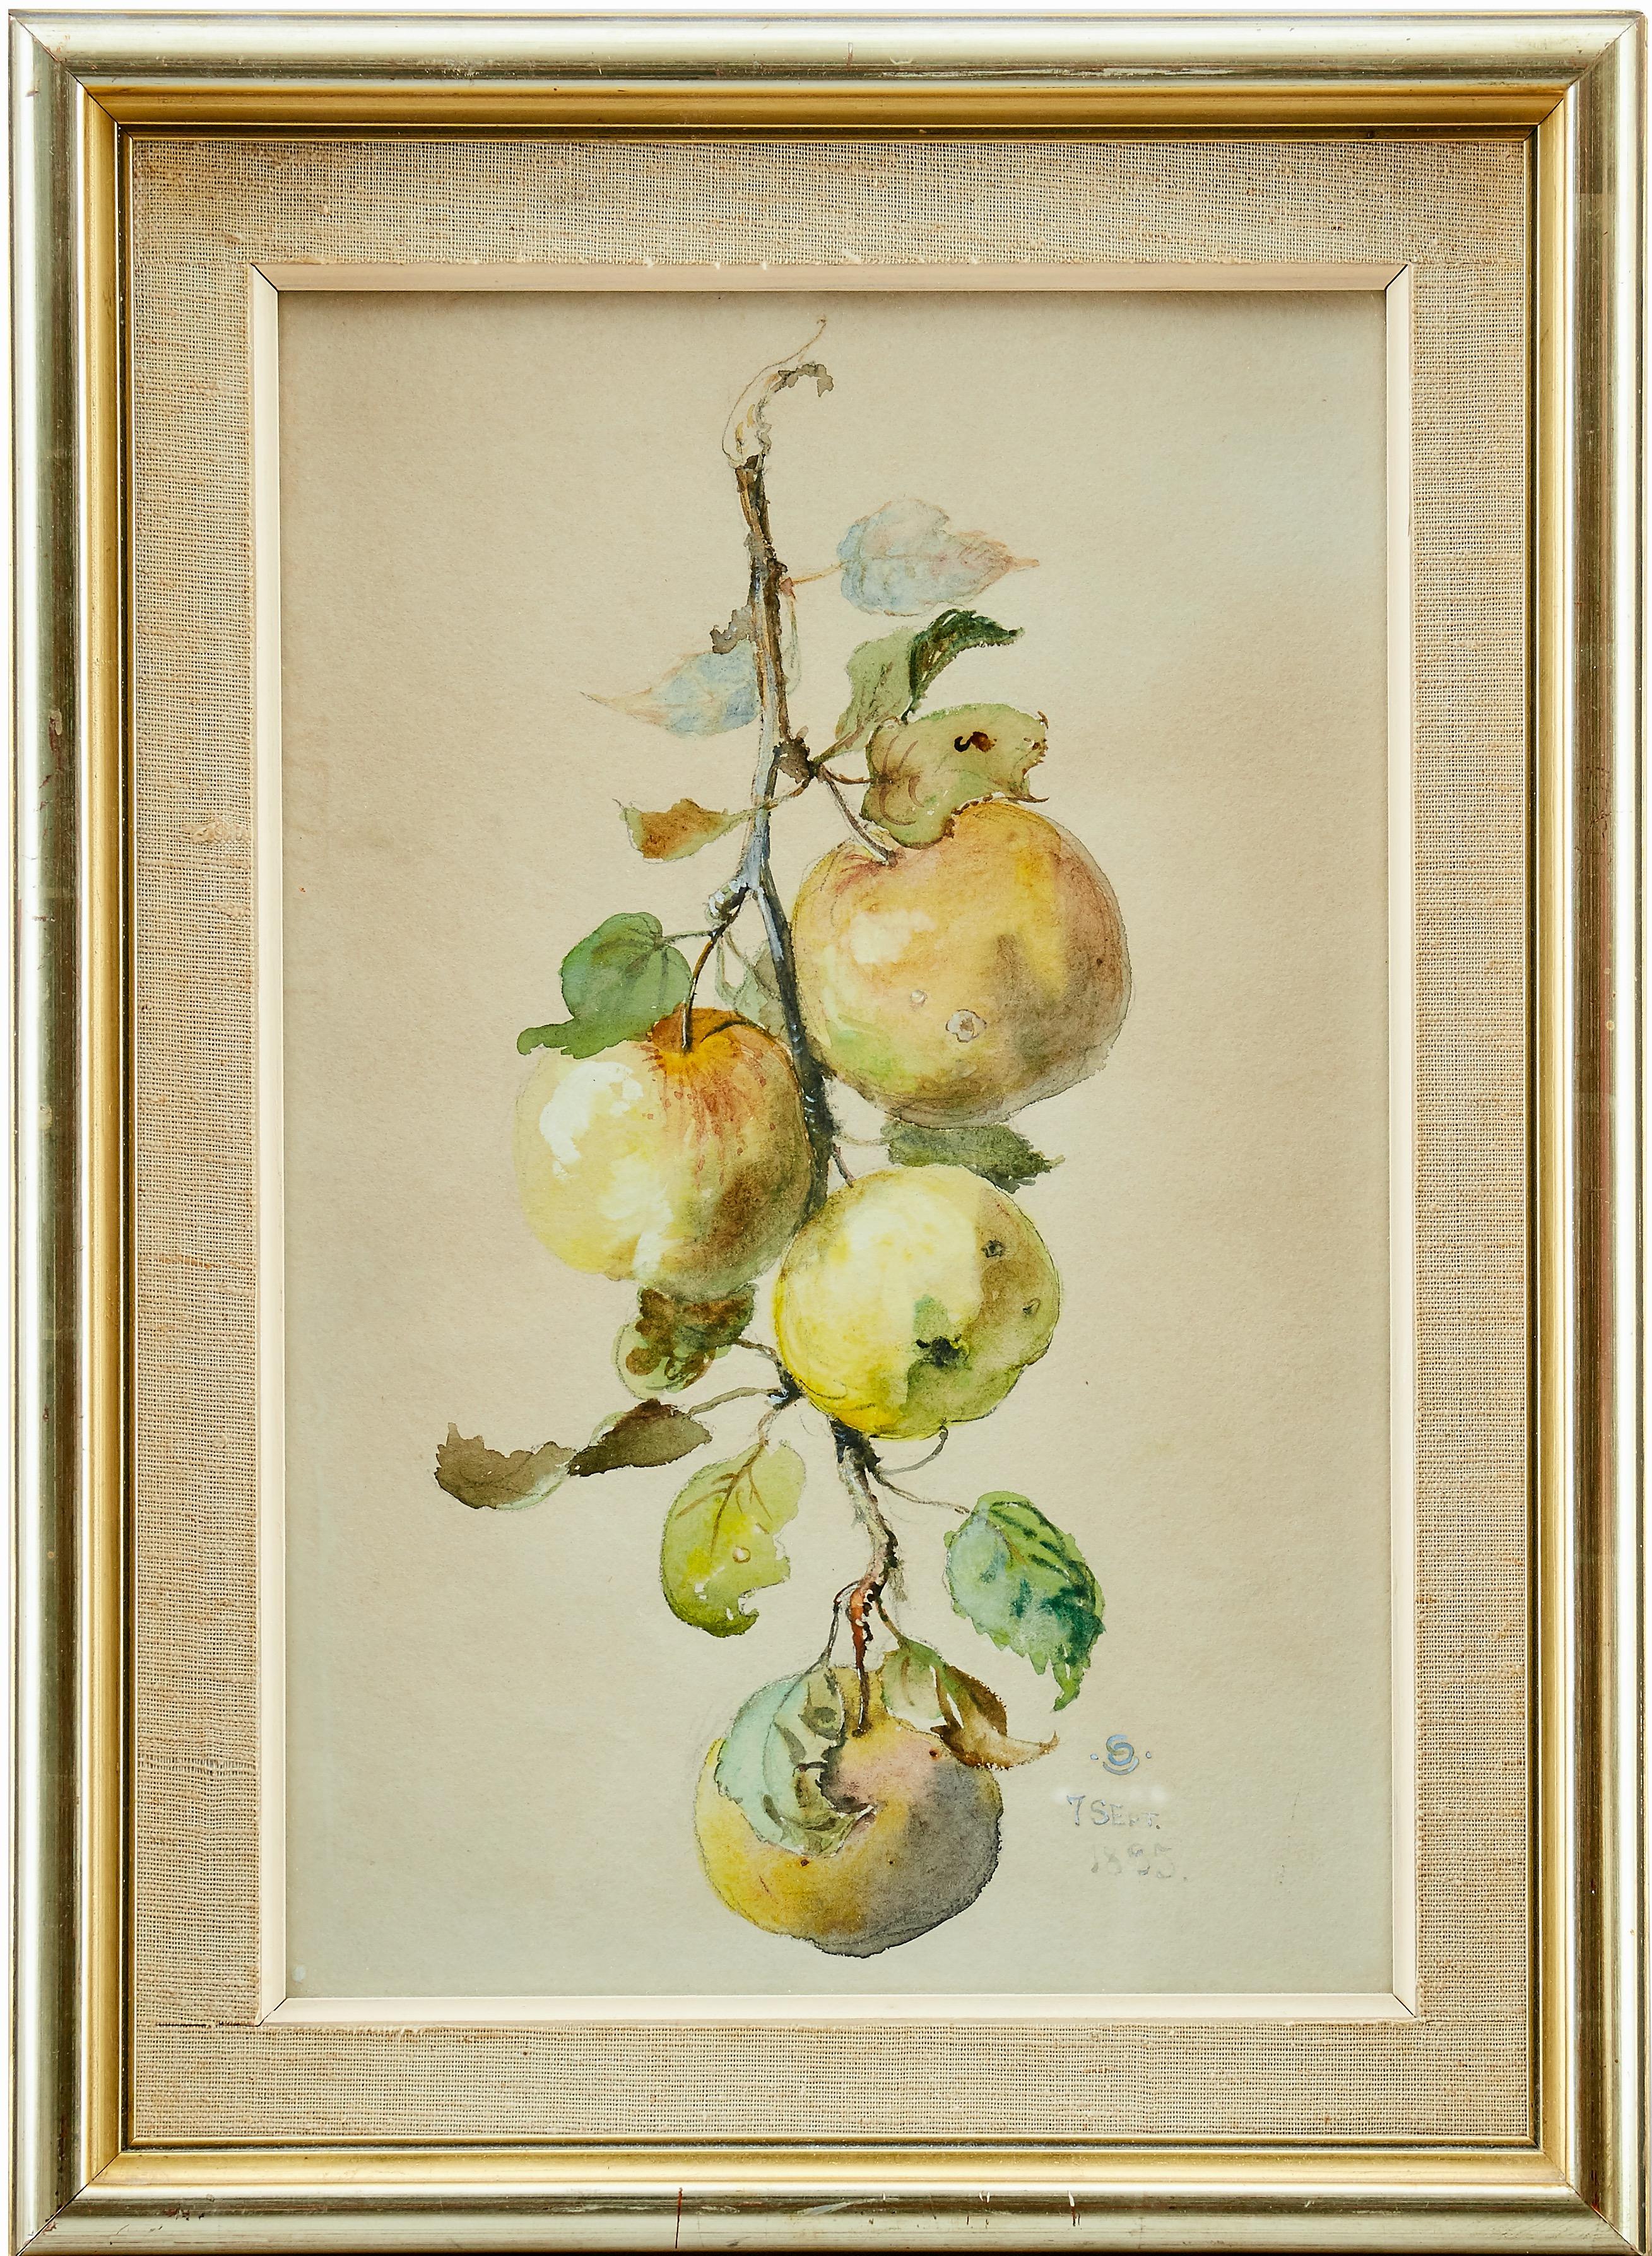 Tree Branch With Apples, Watercolor, 1895